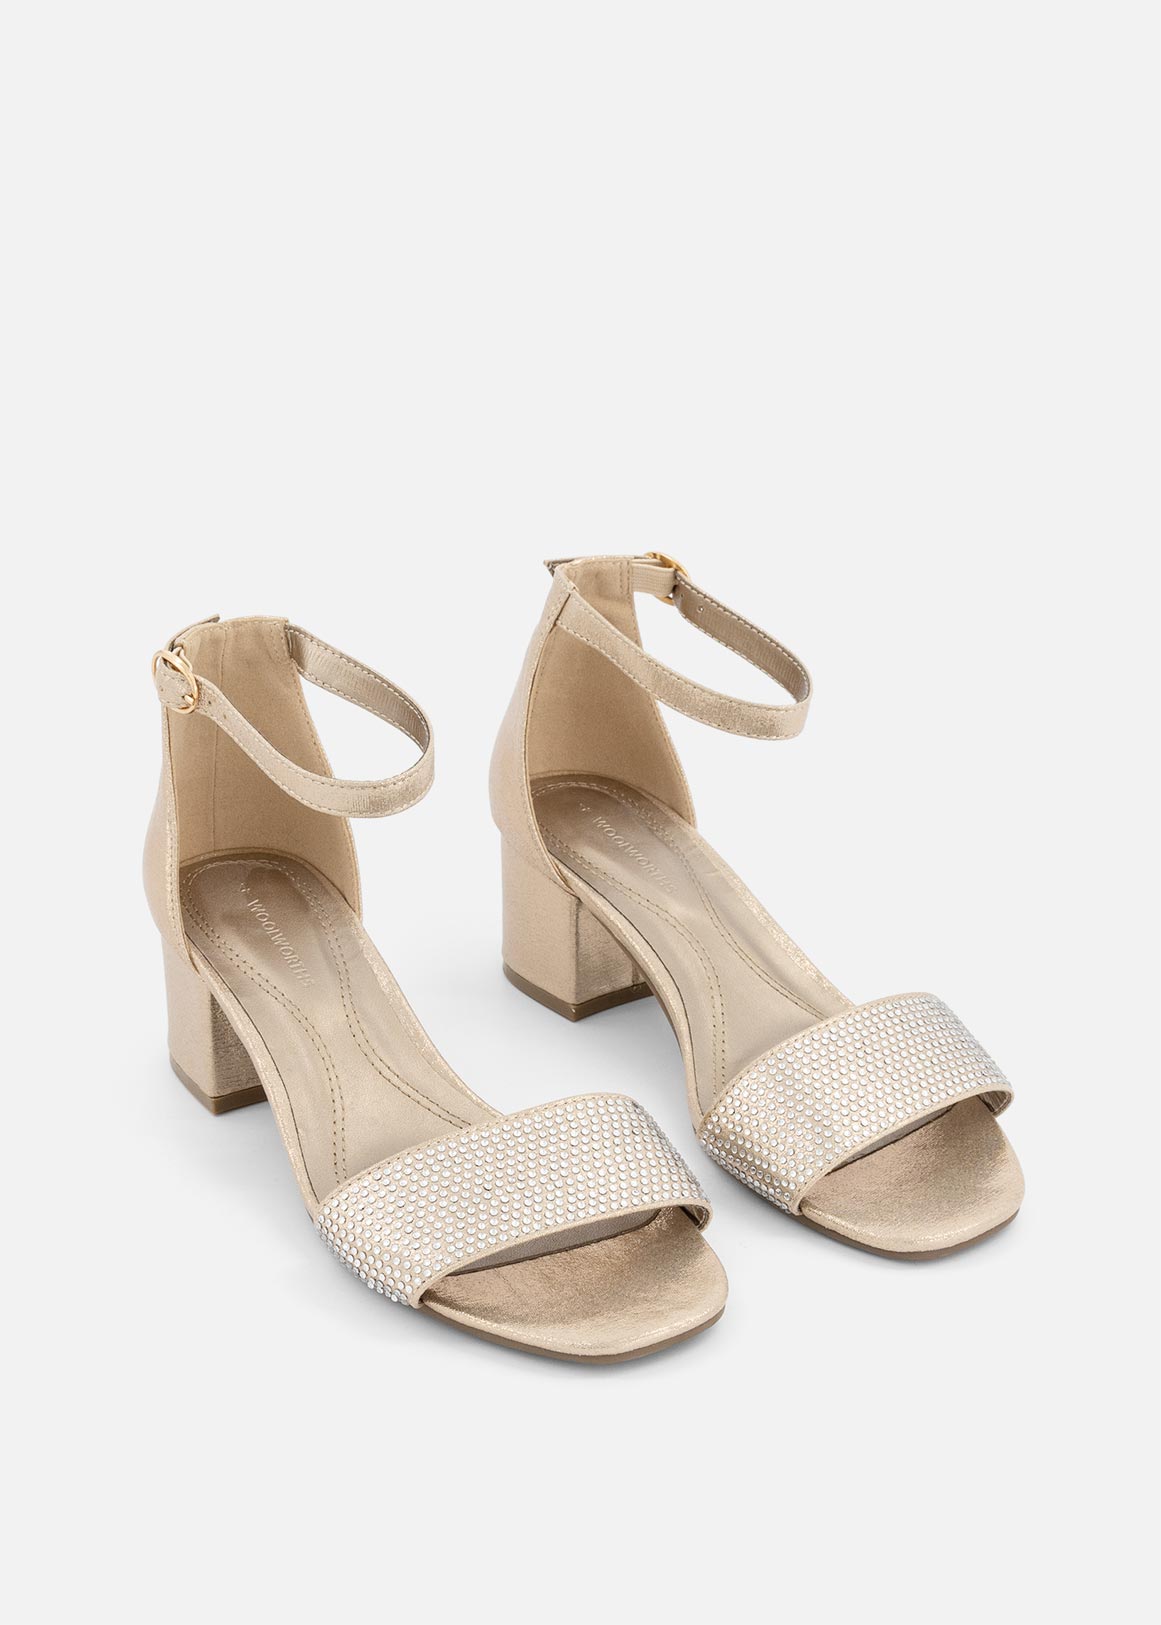 Vera Pelle Strapped High-Heeled Sandals white-natural white casual look Shoes High-Heeled Sandals Strapped High-Heeled Sandals 